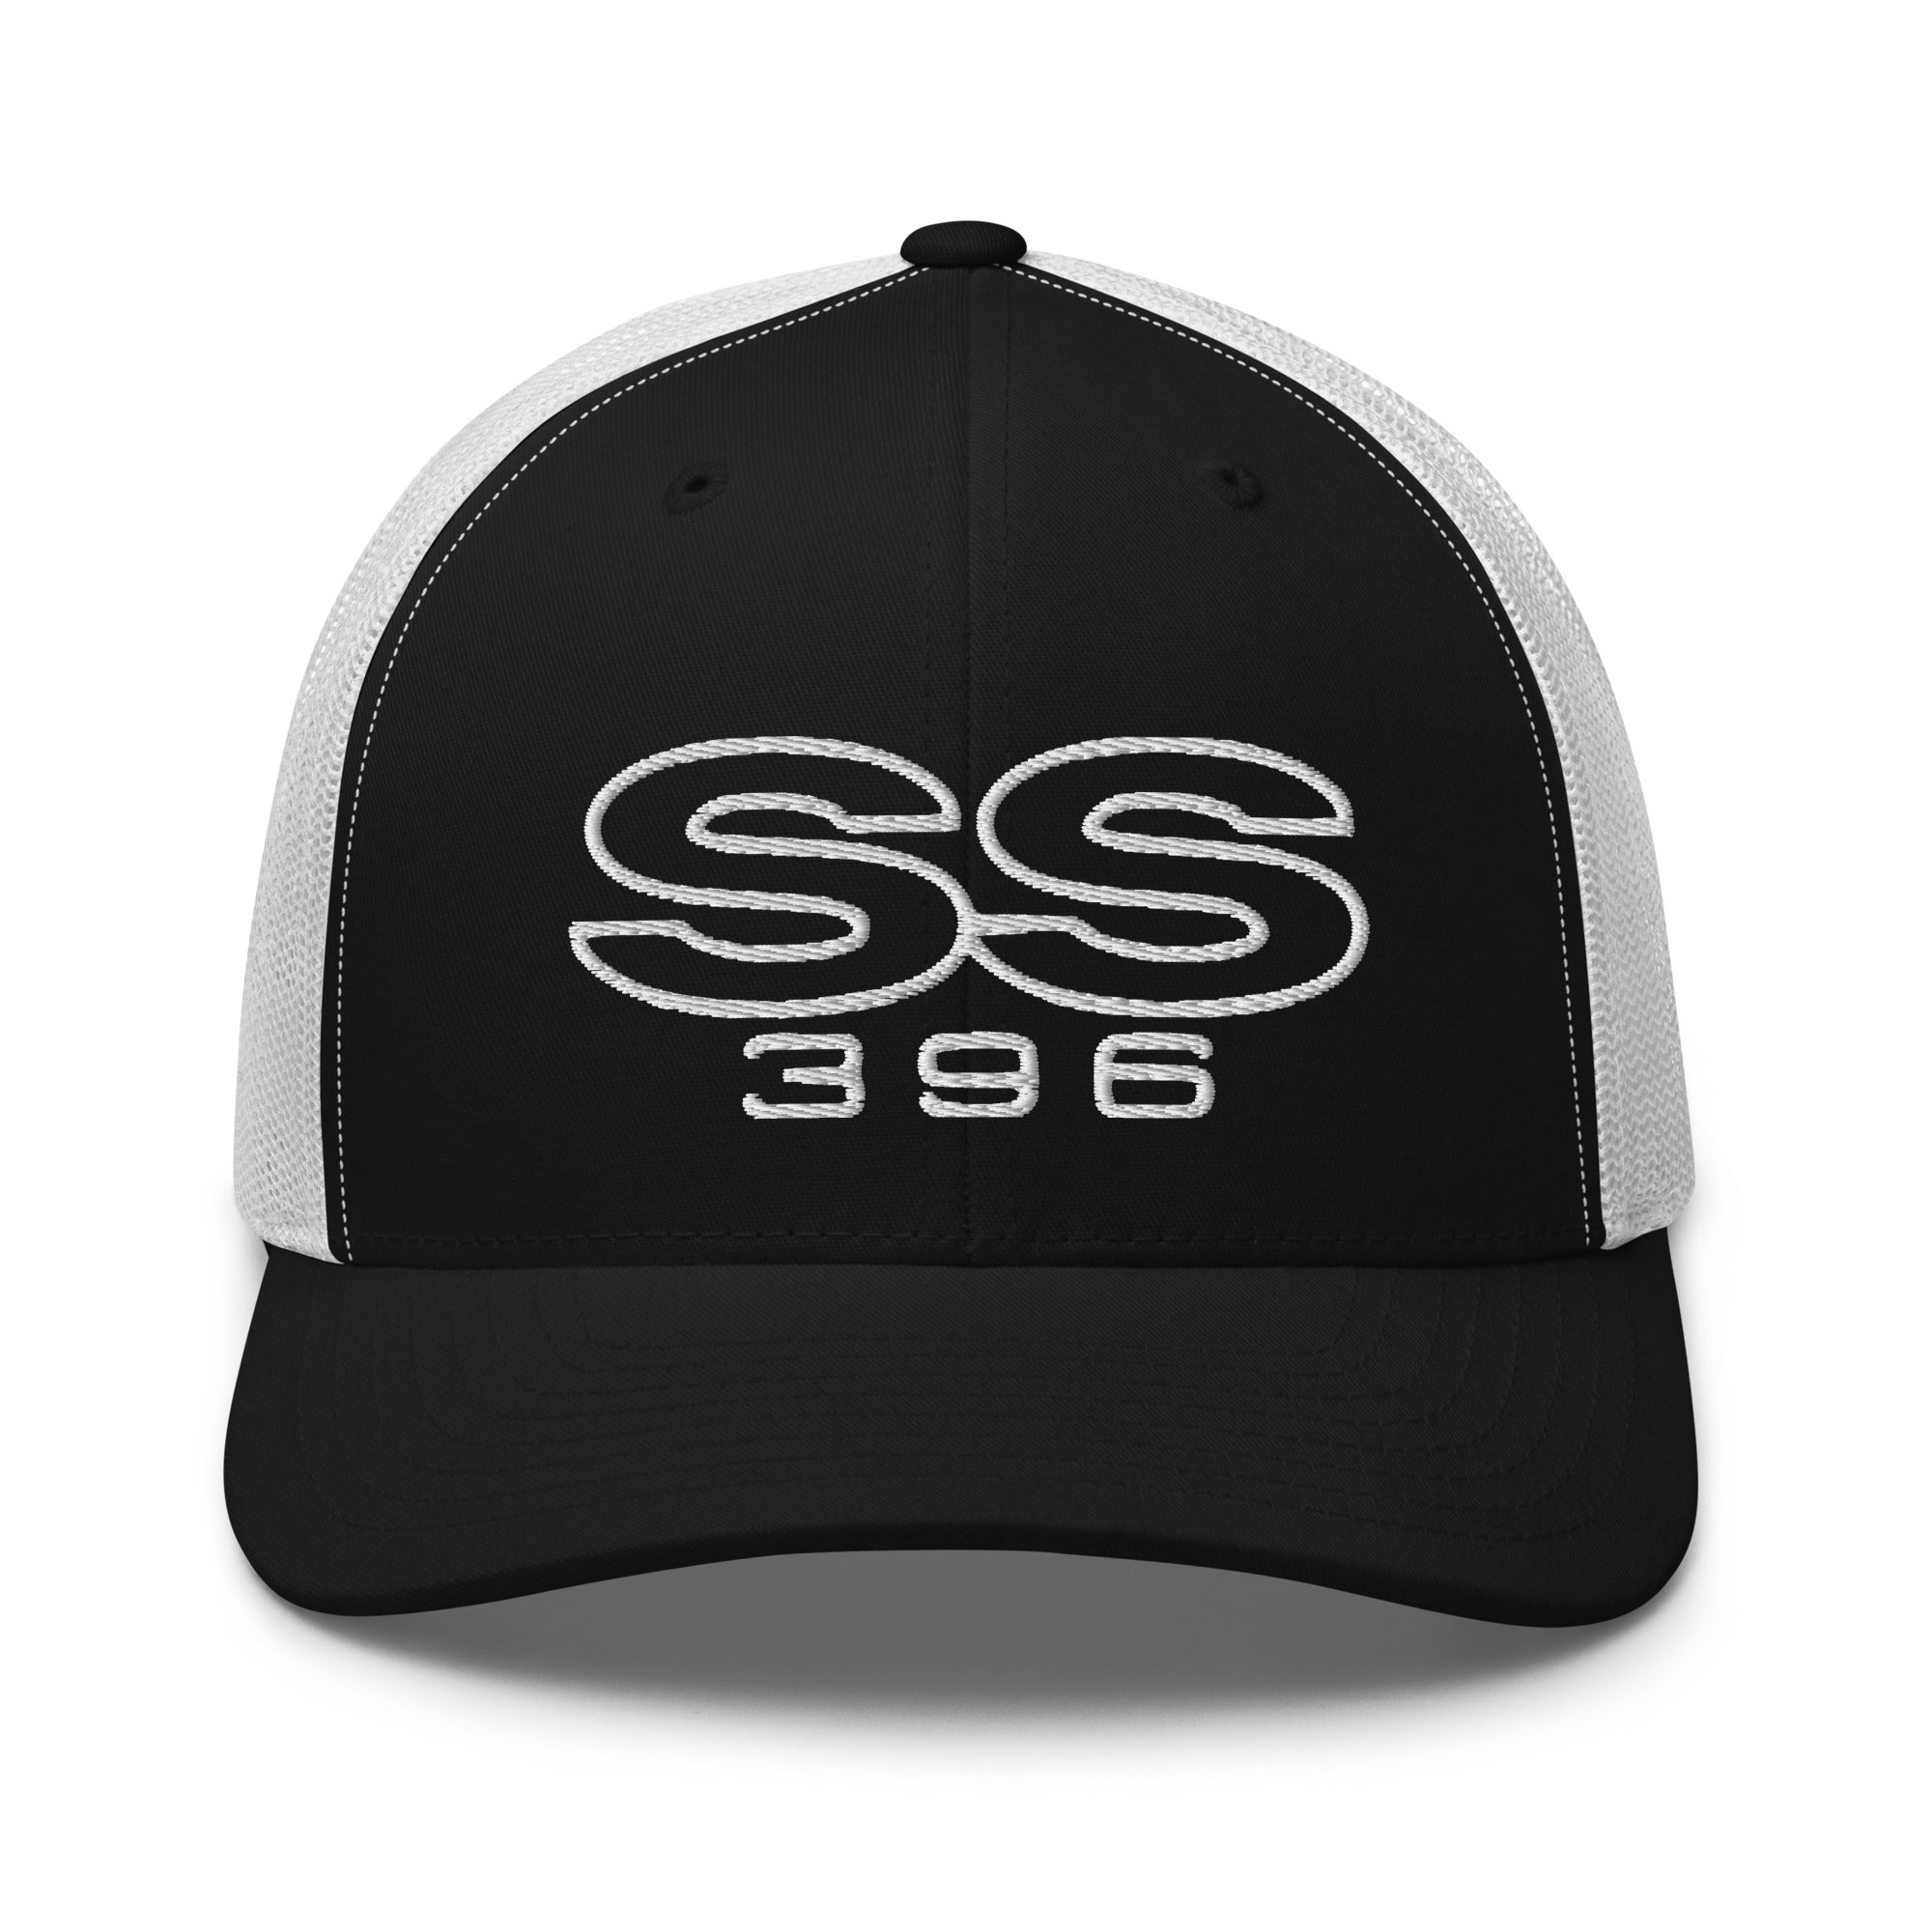 SS 396 Chevy Engine Muscle Car Owner Gift Trucker Cap